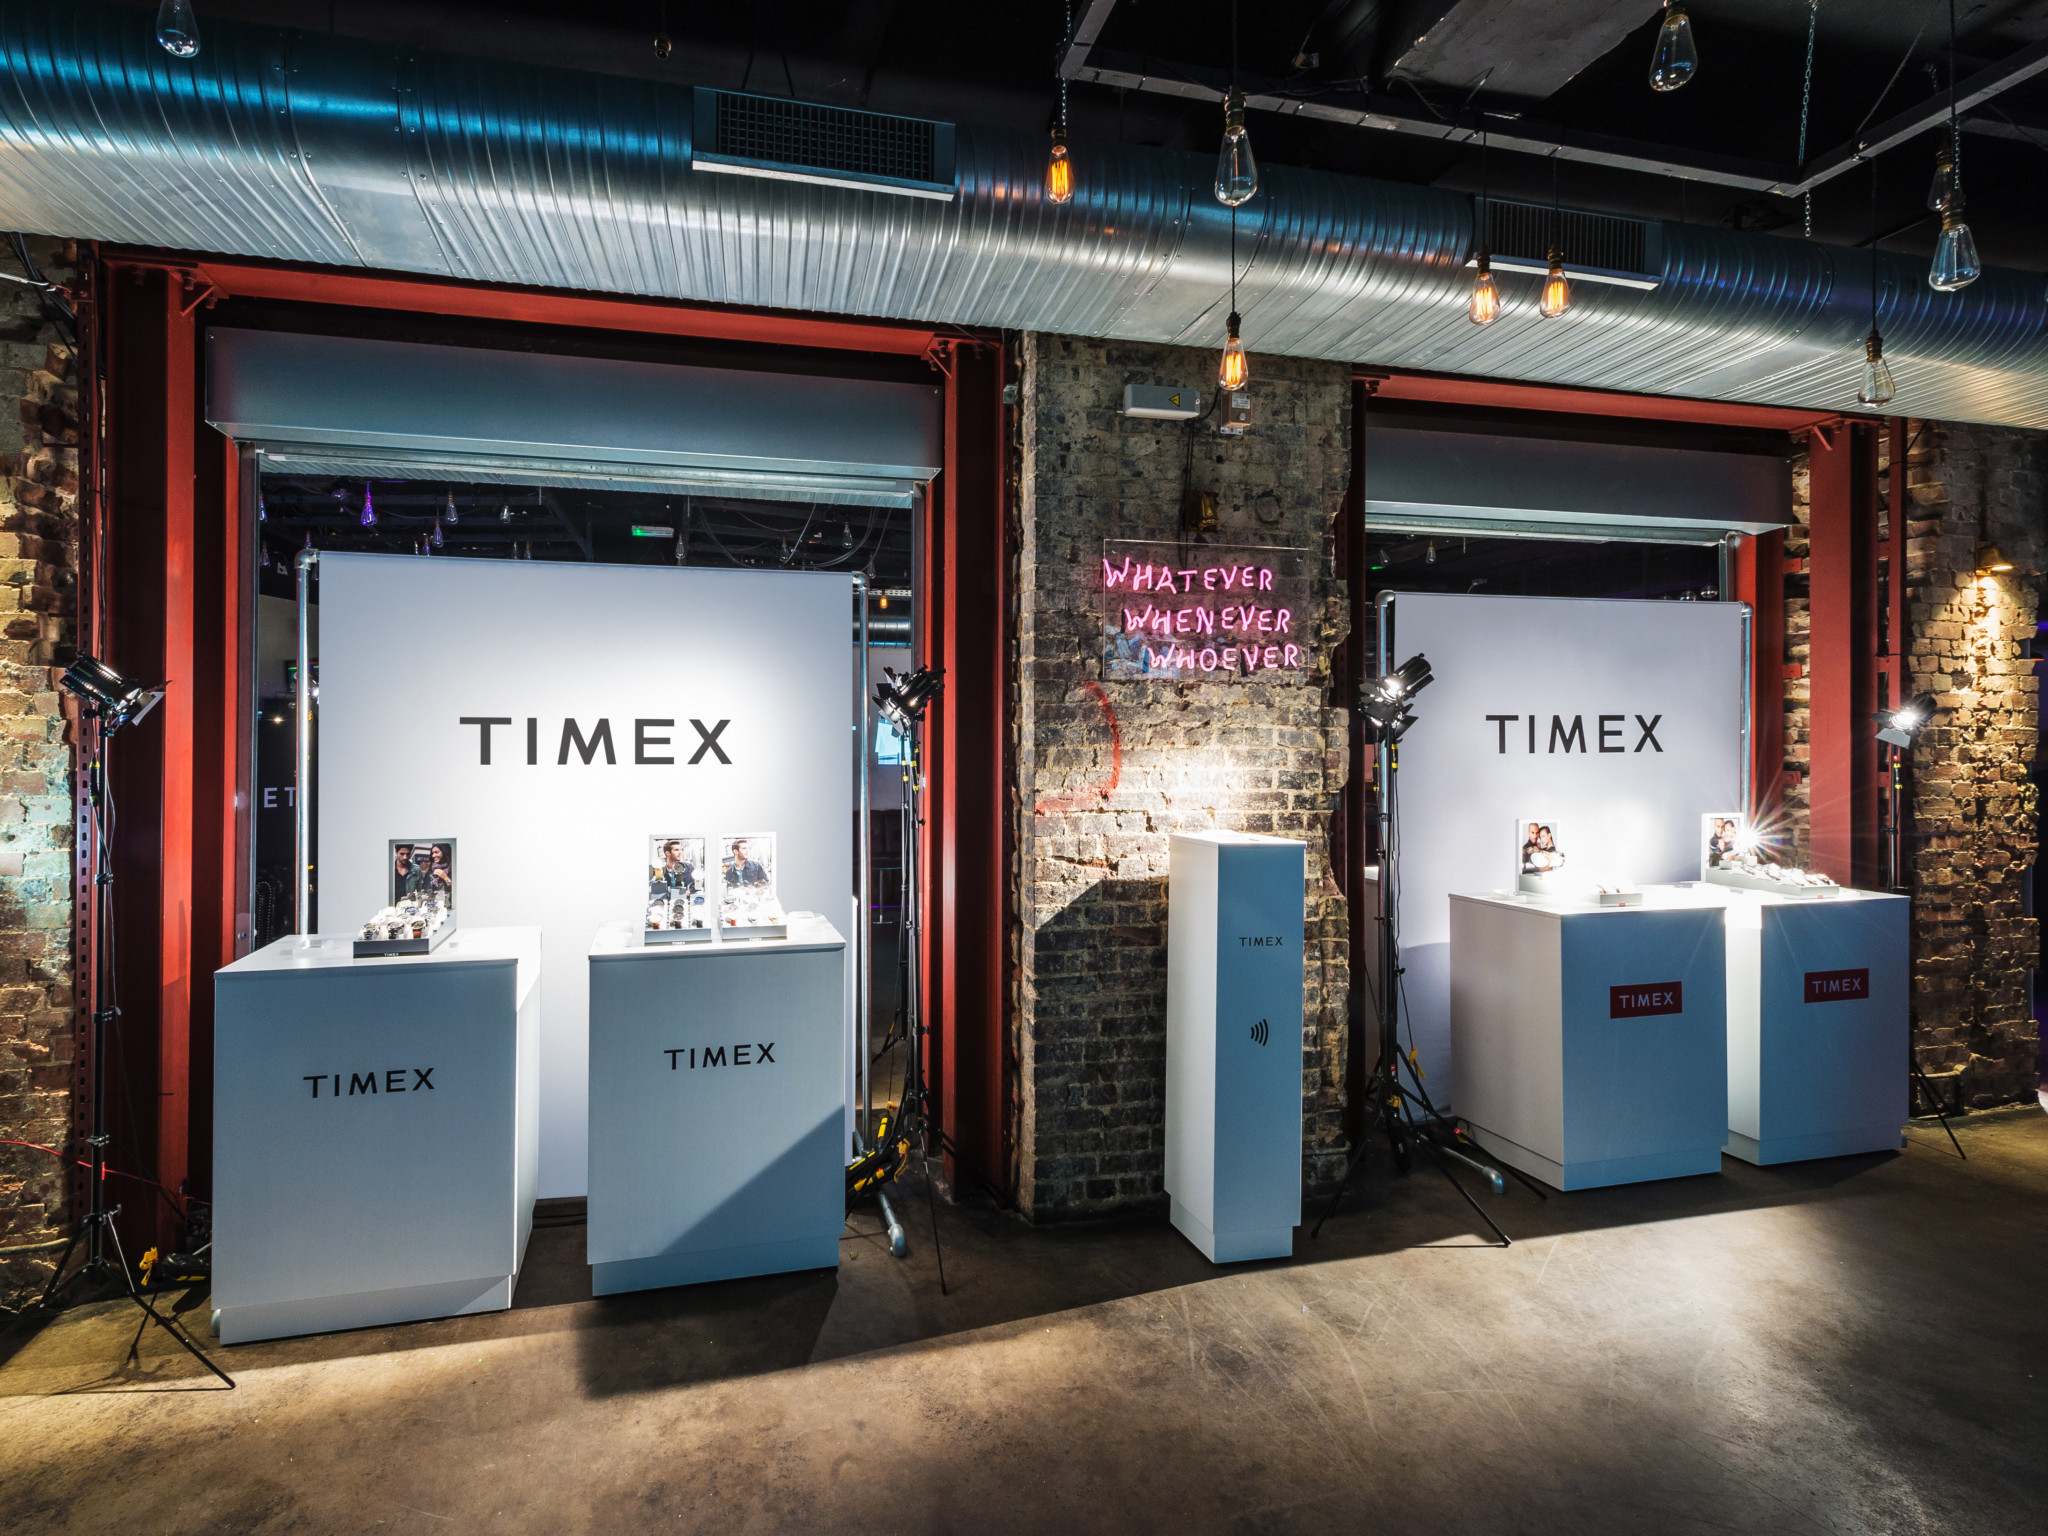 Timex london beat this year used redd retail group for its graphics, stand build and printing.